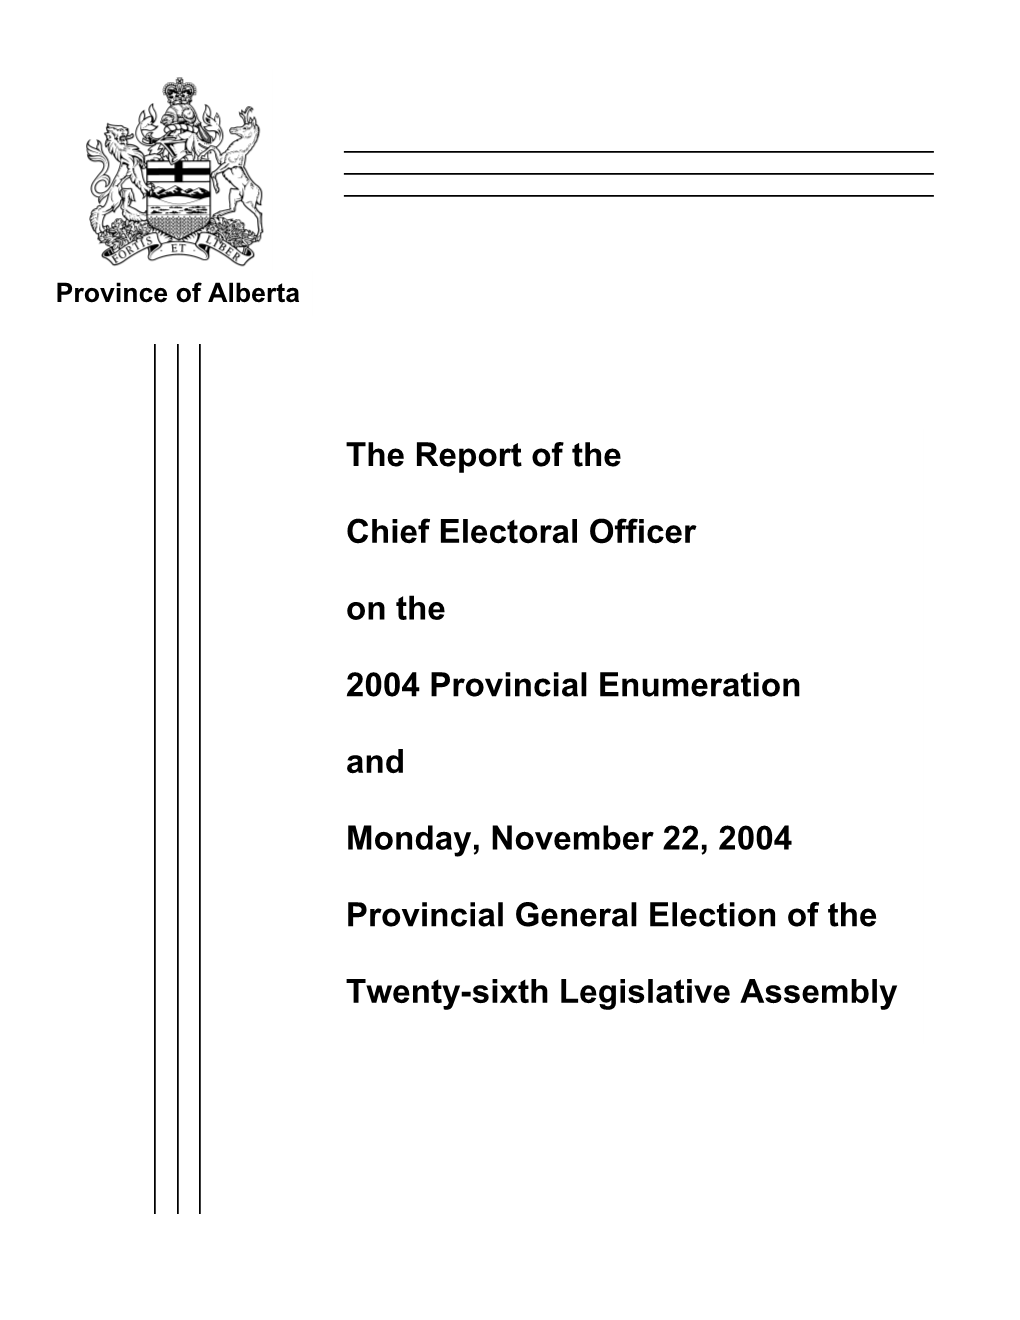 The Report of the Chief Electoral Officer on the 2004 Provincial